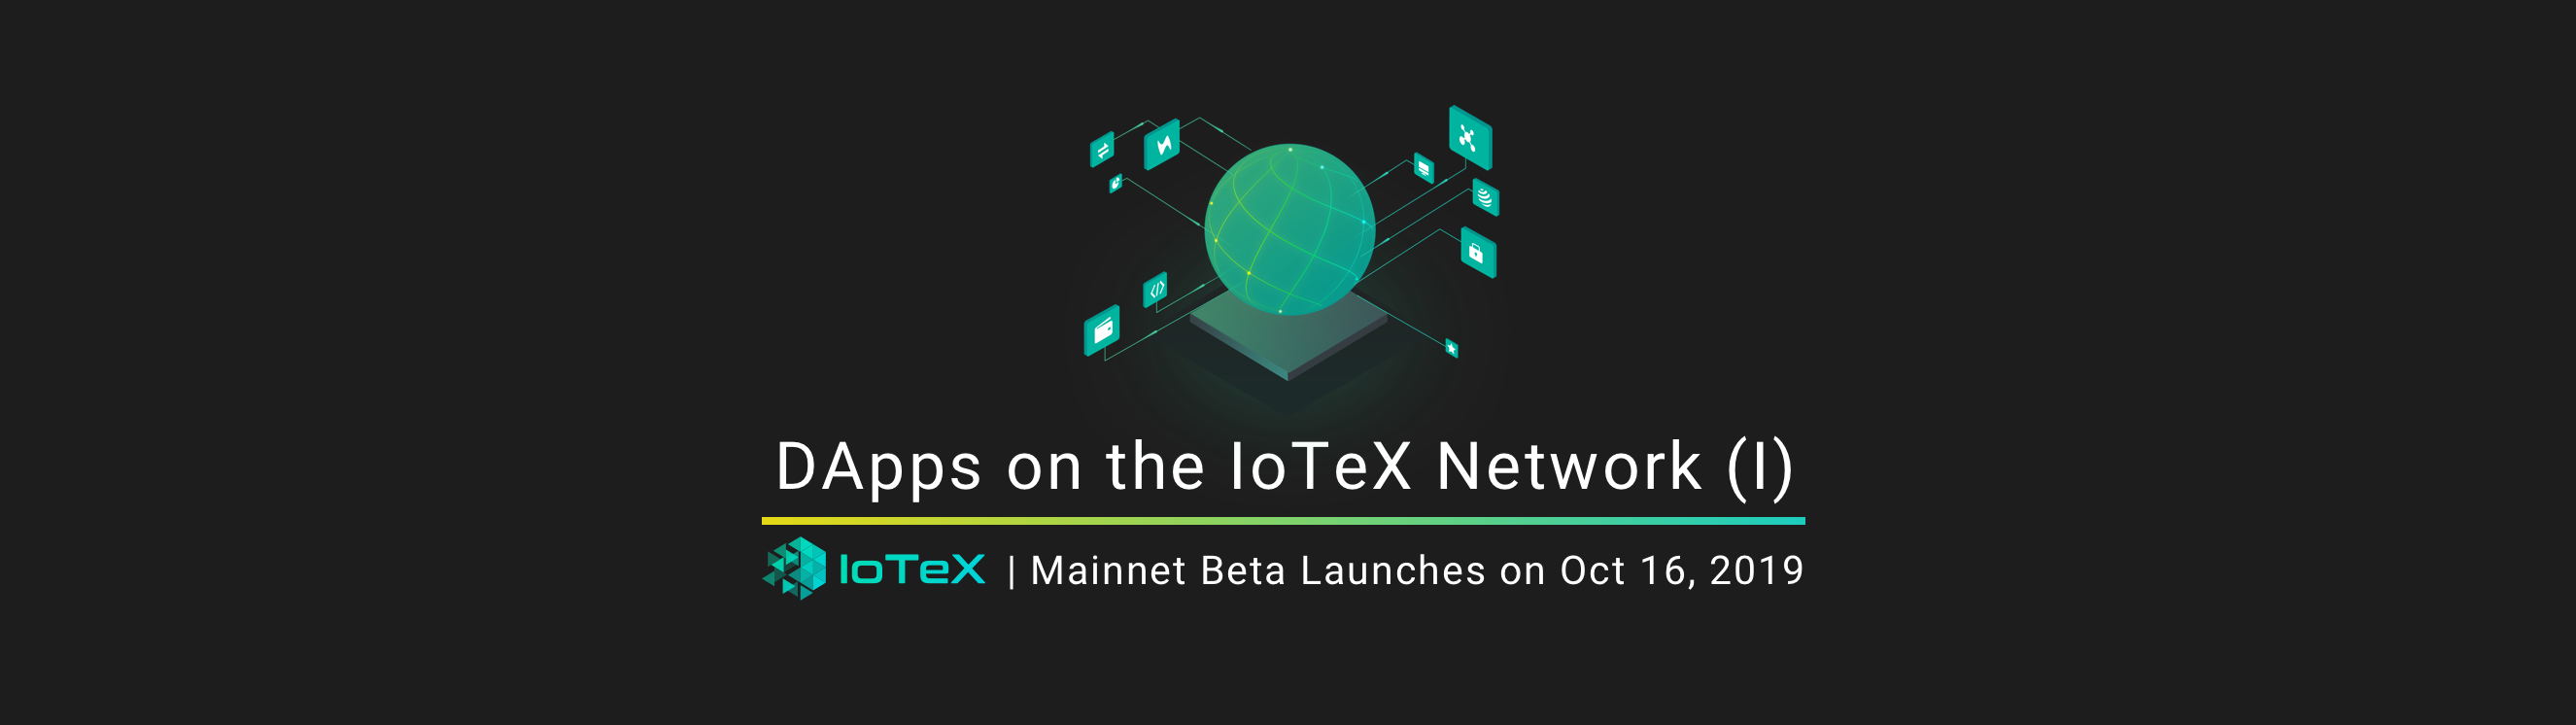 DApps on the IoTeX Network (Part I)